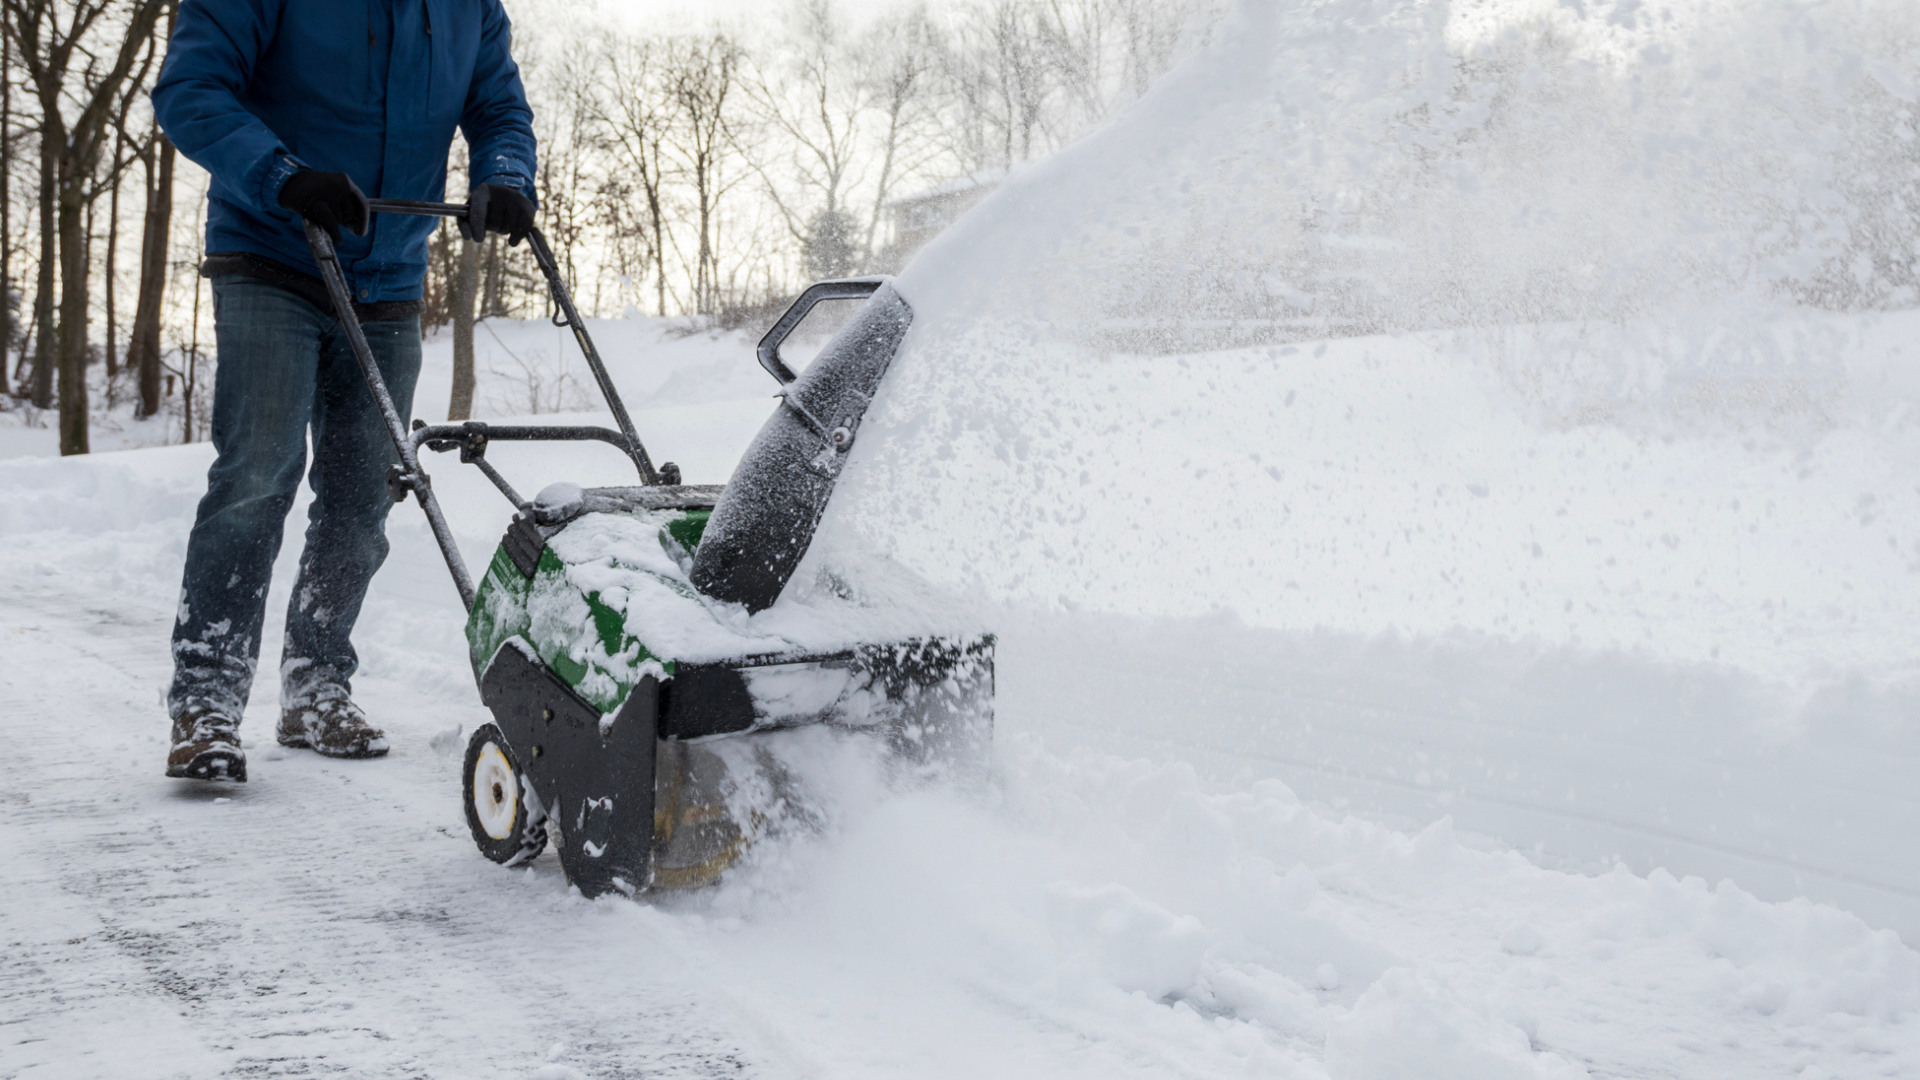 10 snow blowers to buy now ahead of the winter storms hitting the U.S